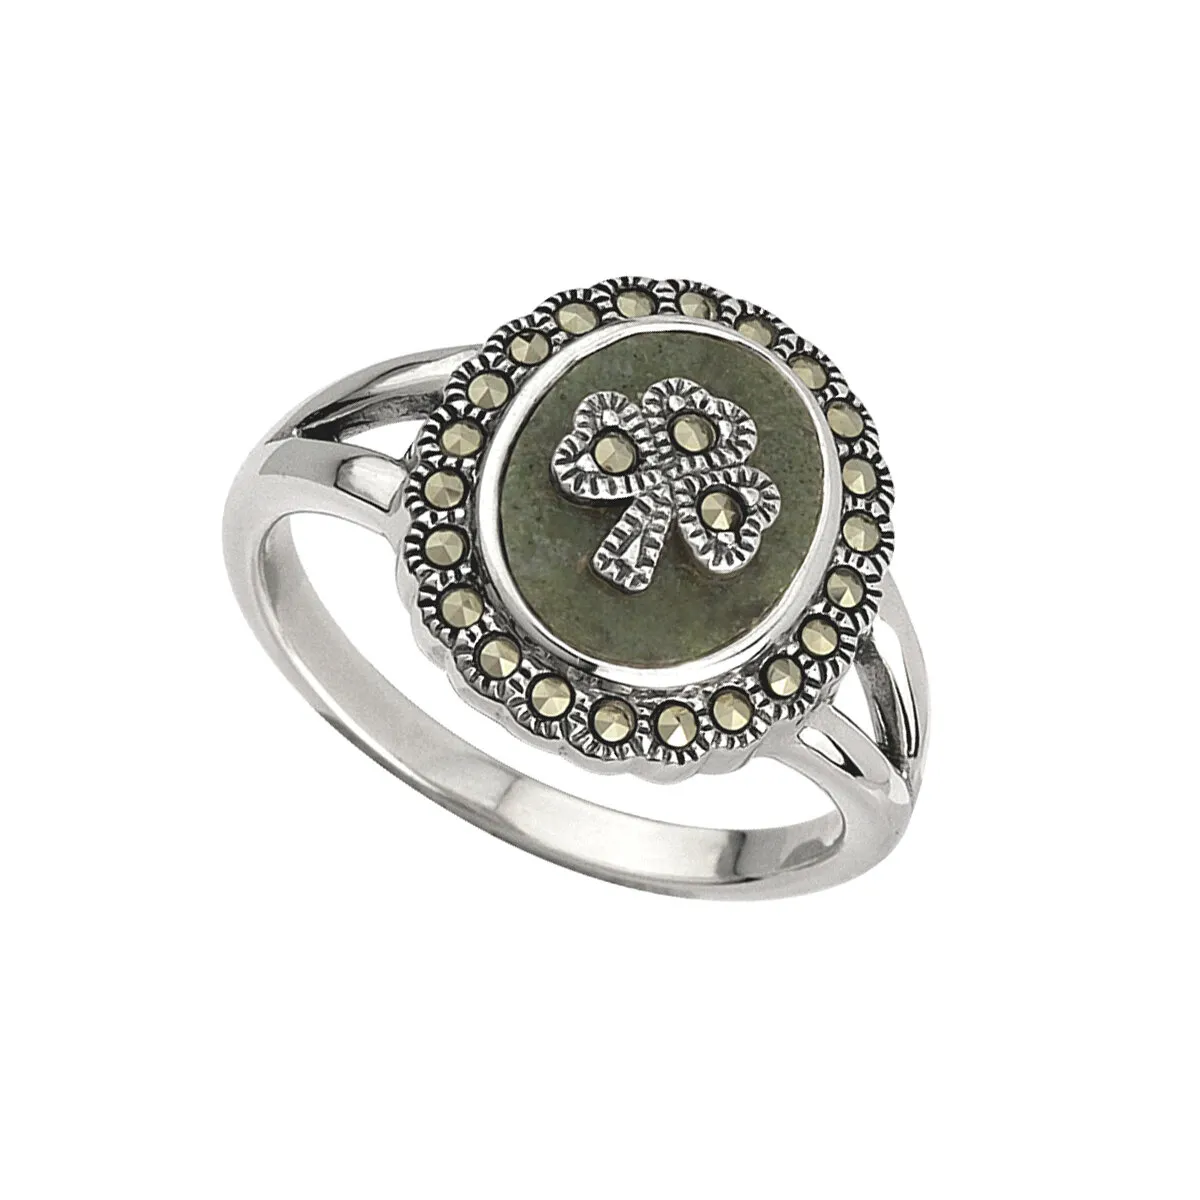 Product Review Connemara Marble & Marcasite Shamrock Ring in Sterling Silver